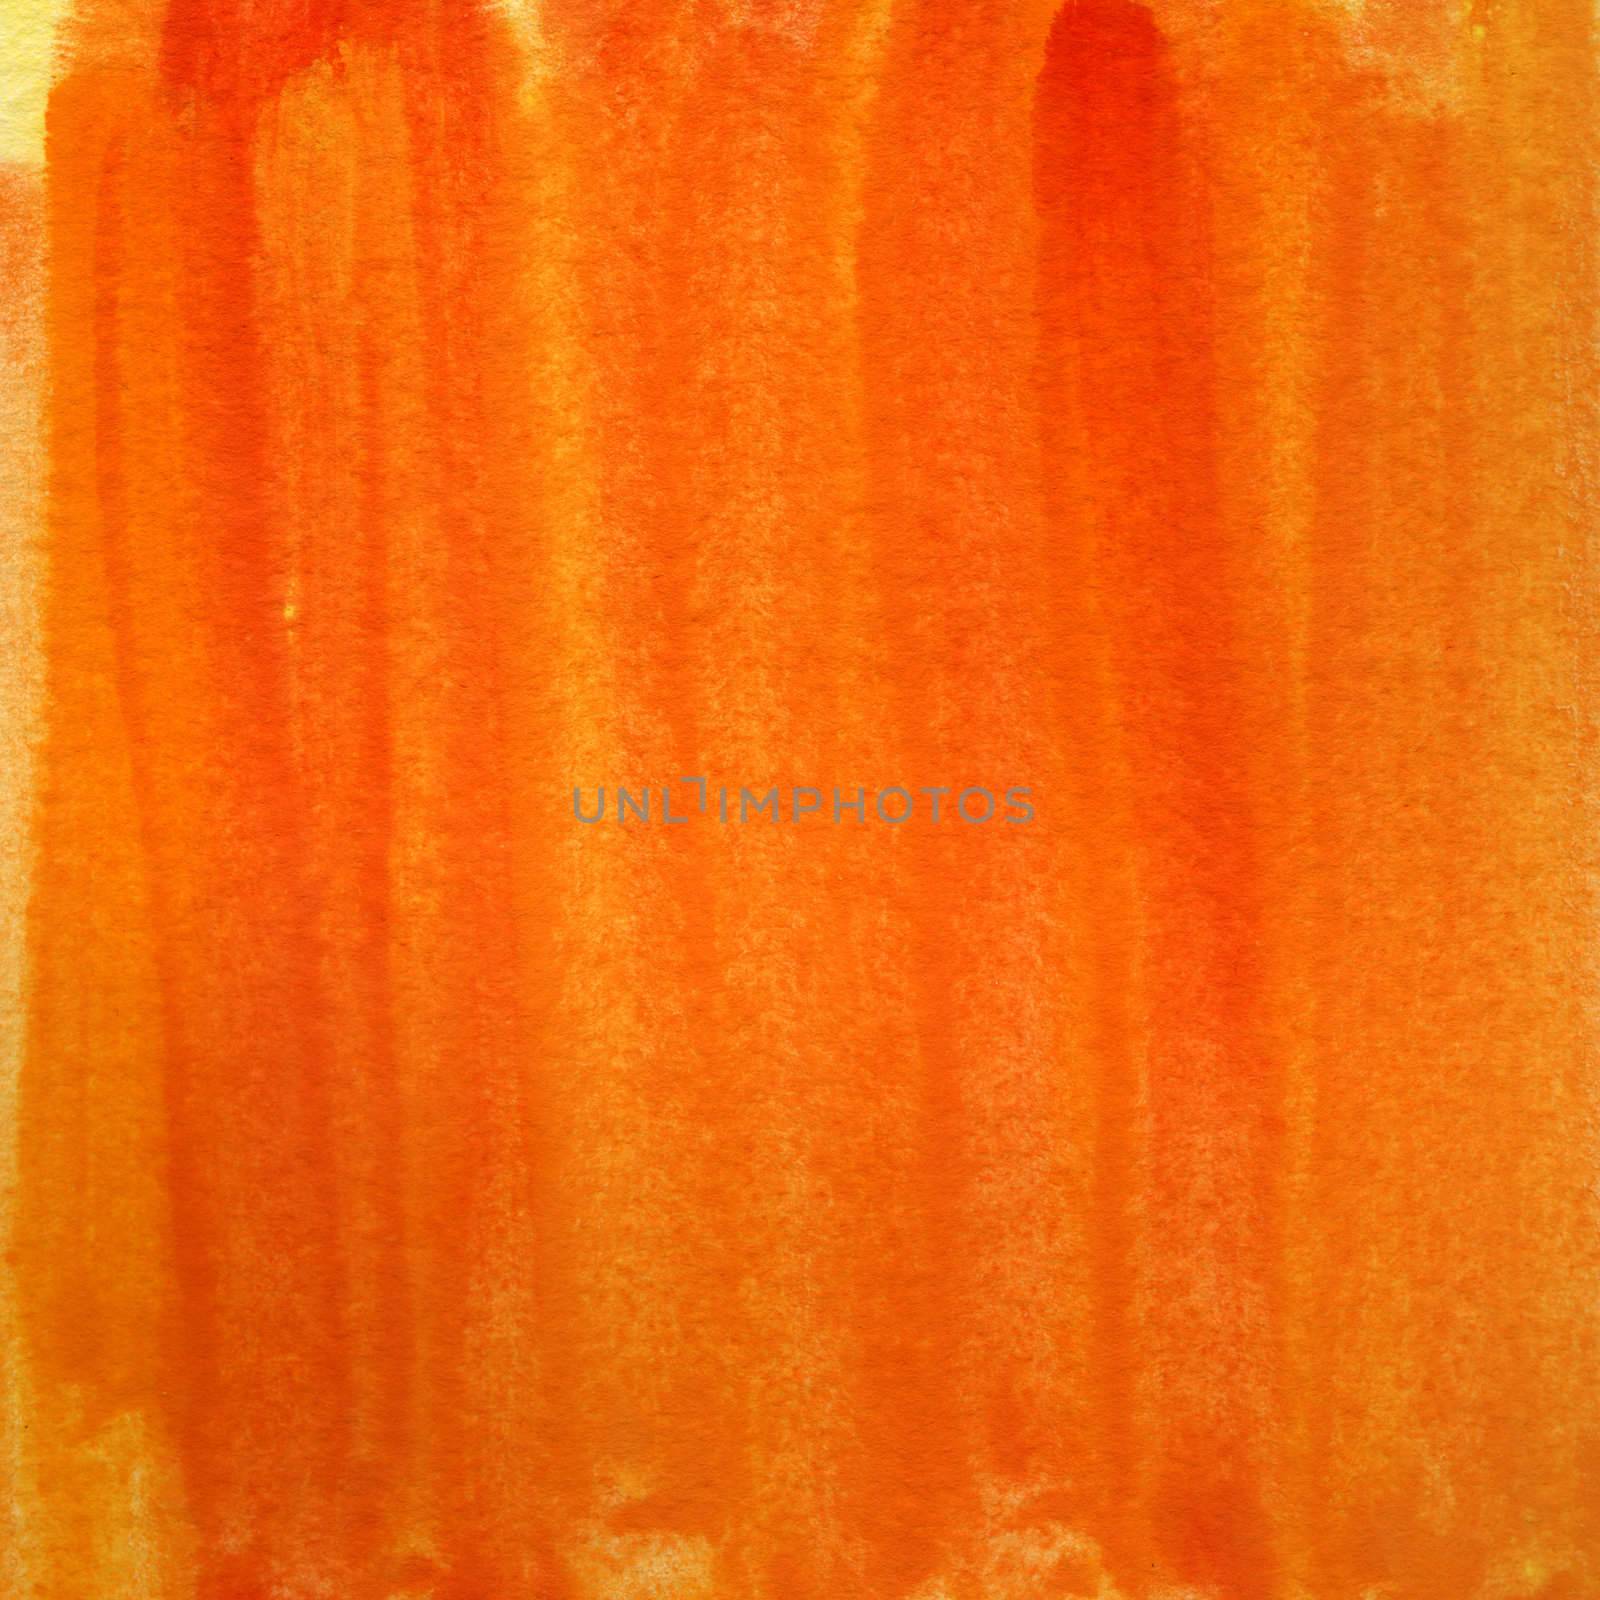 yellow and orange watercolor background painted with vertical brush strokes